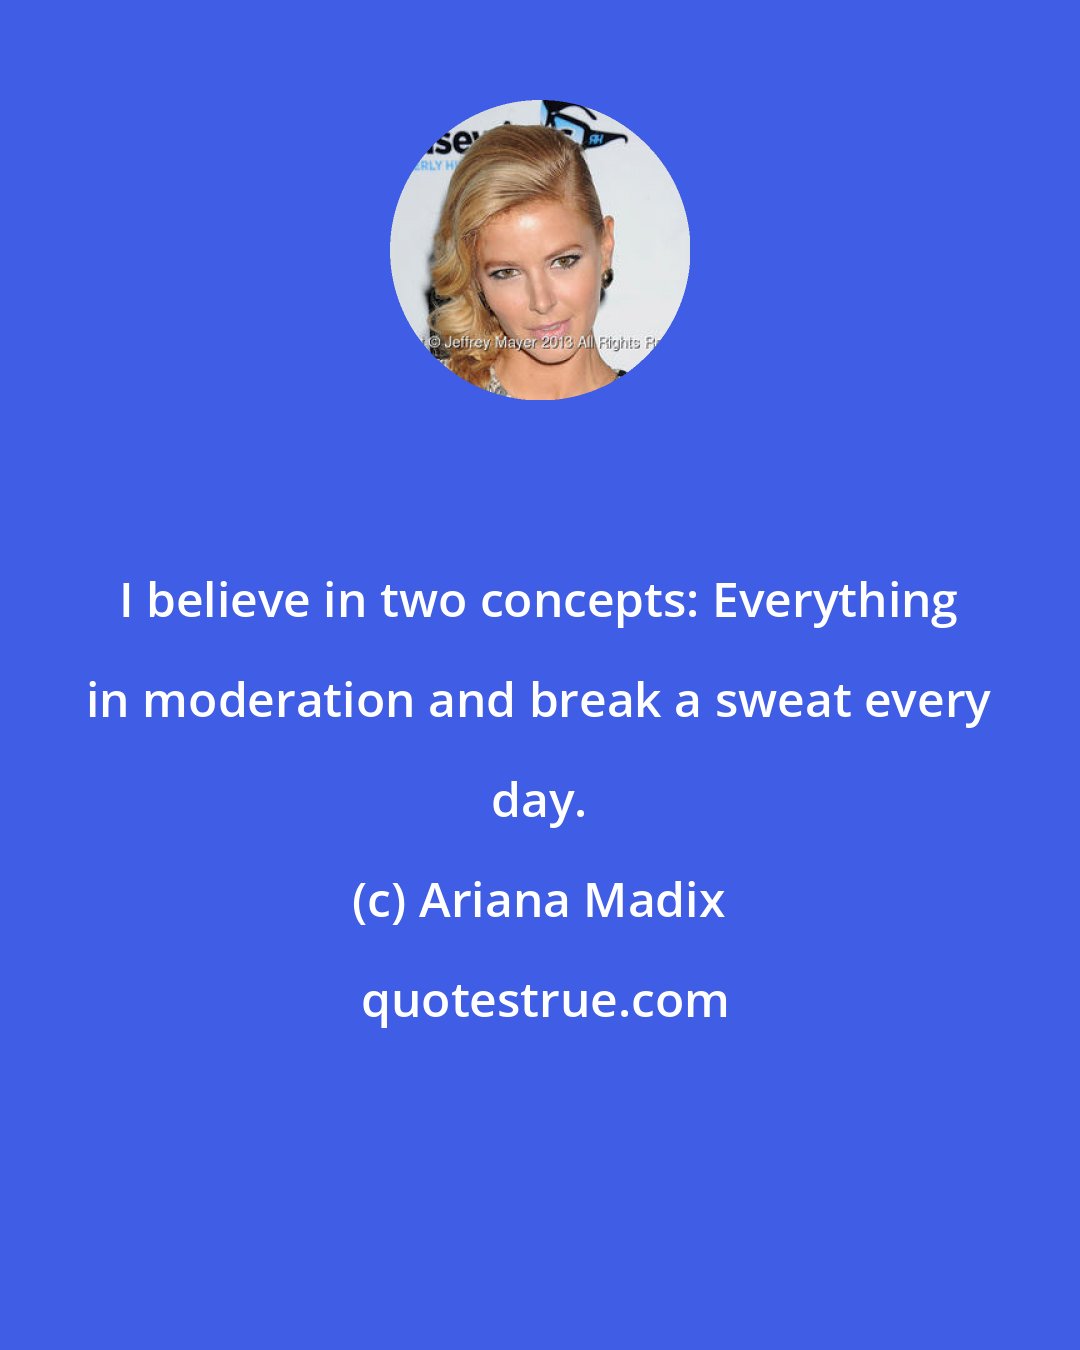 Ariana Madix: I believe in two concepts: Everything in moderation and break a sweat every day.